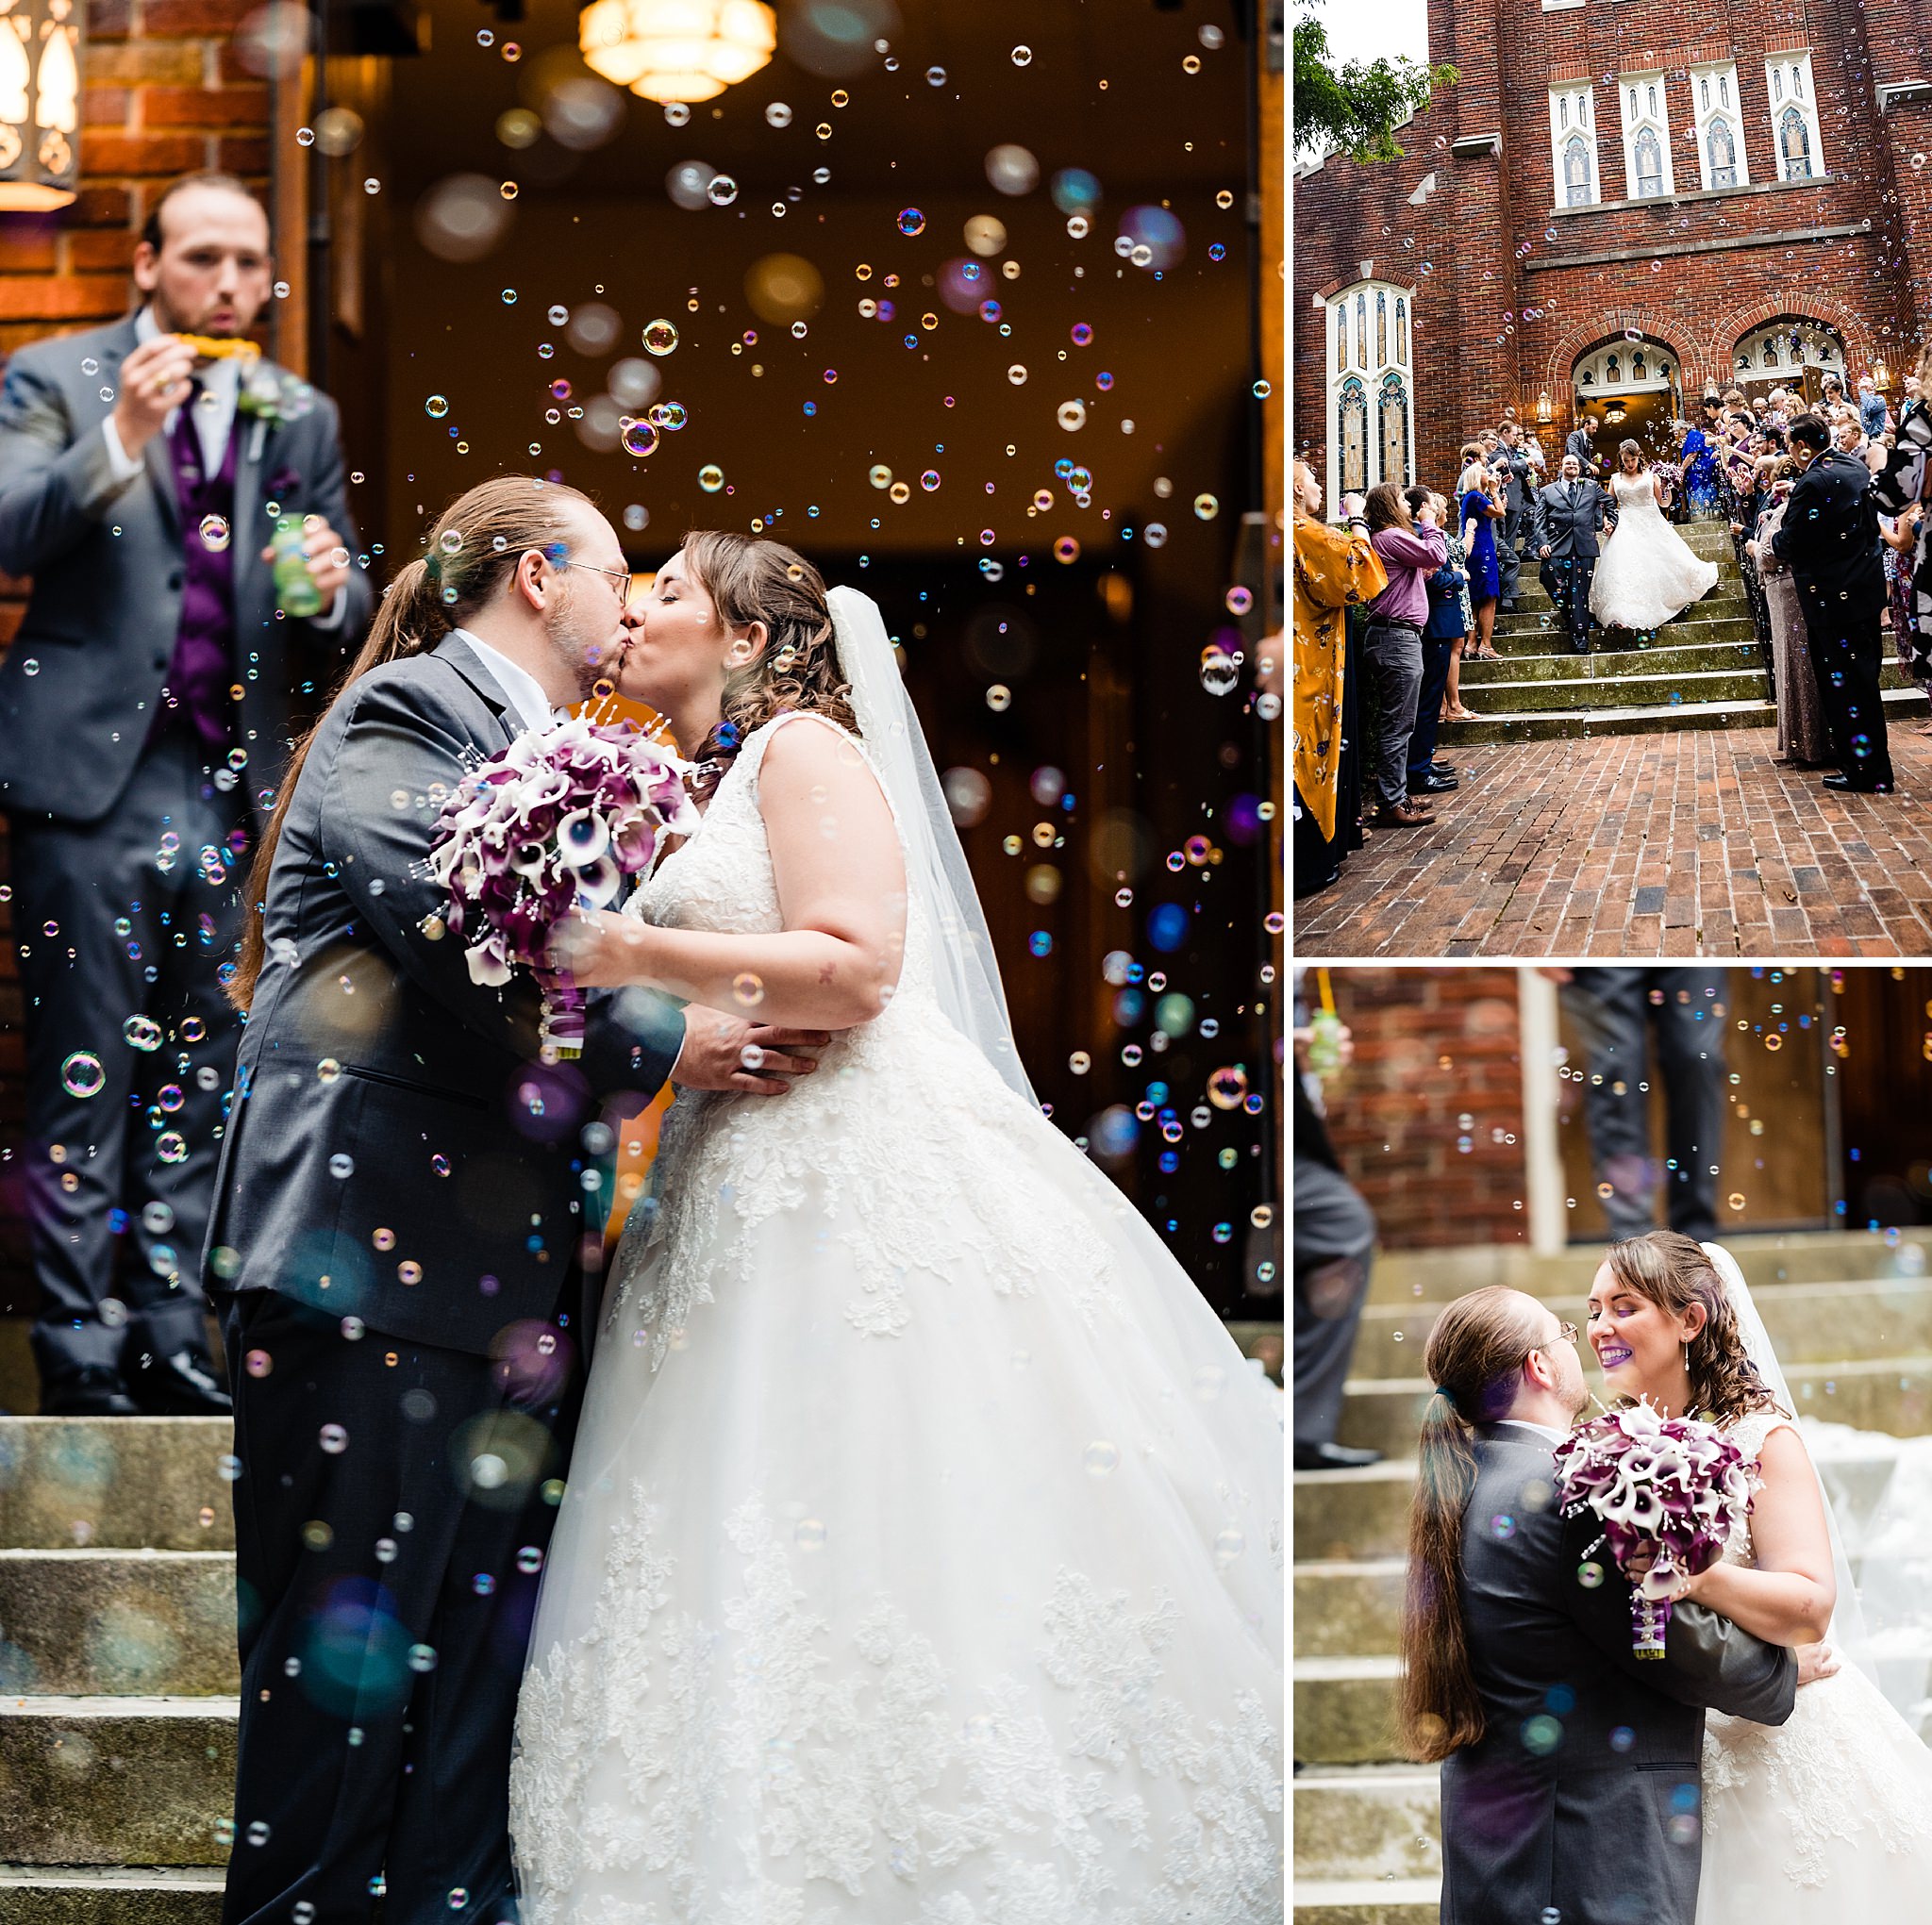 Bride and groom exit their Trinity Avenue Presbyterian Church wedding to bubbles blown by their guests